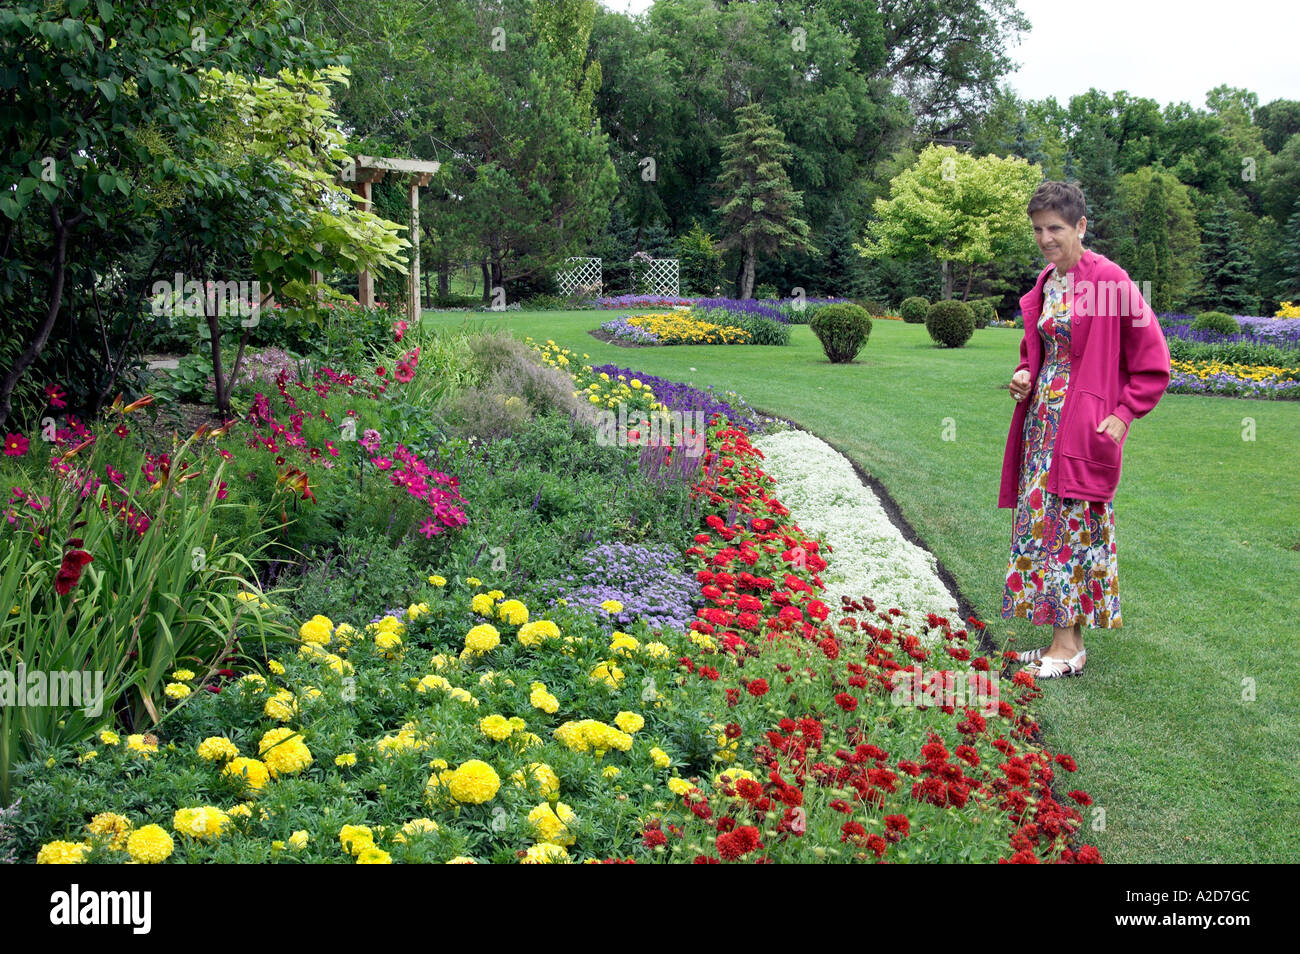 A lady in bright pink admiring flowers in the flower gardens of Kildonan Park in Winnipeg Manitoba Canada Stock Photo